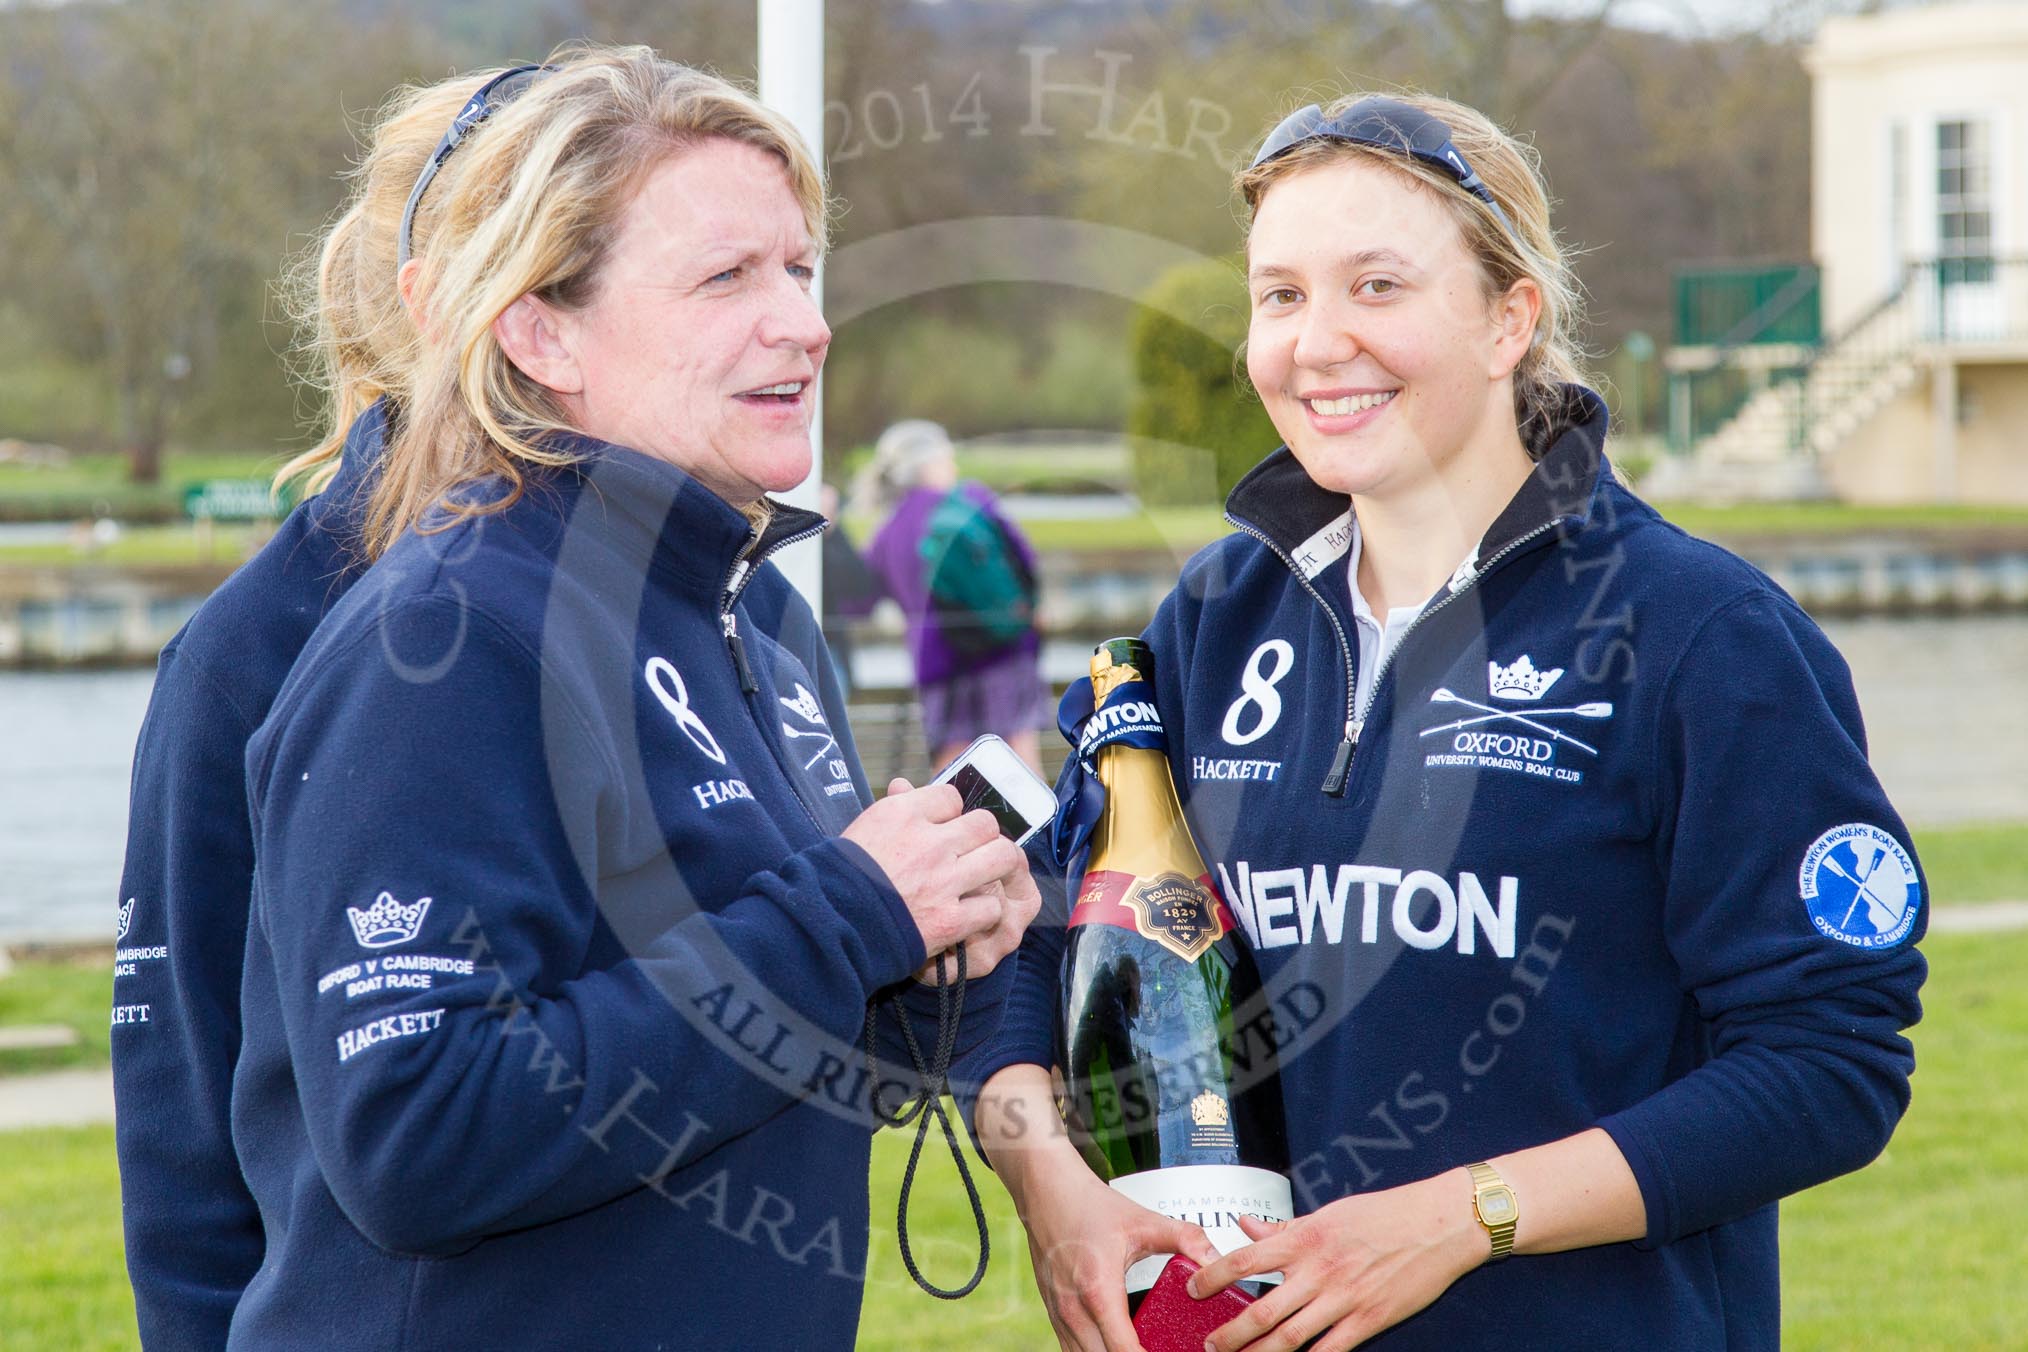 The Women's Boat Race and Henley Boat Races 2014: Christine Wilson, OUWBC Chief Coach, with OUWBC president Maxie Scheske and a bottle of Bollinger Champagne..
River Thames,
Henley-on-Thames,
Buckinghamshire,
United Kingdom,
on 30 March 2014 at 17:15, image #539